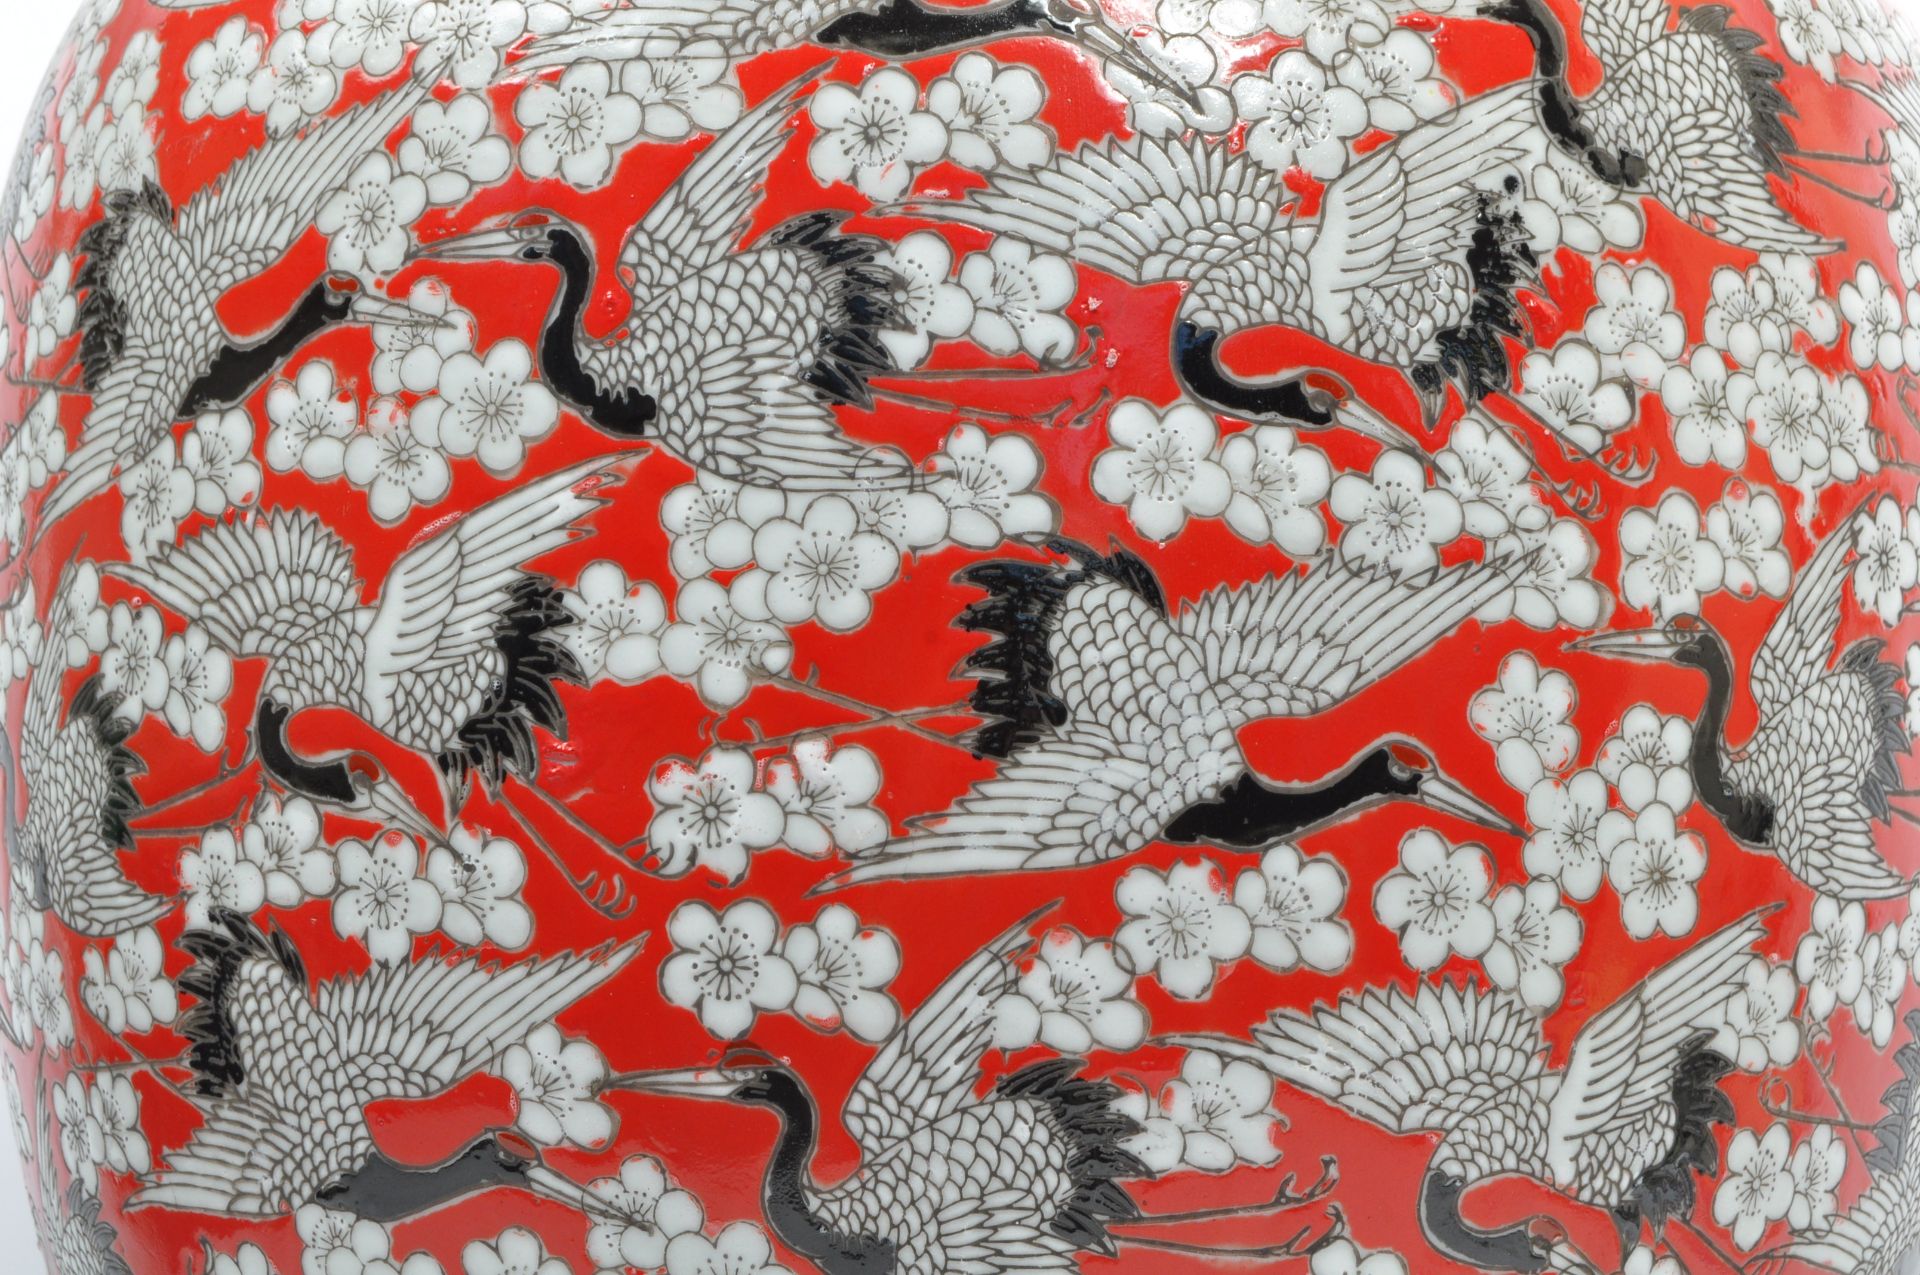 LARGE CHINESE VASE IN RED EMBELLISHED WITH CRANES & BLOSSOM - Image 5 of 6